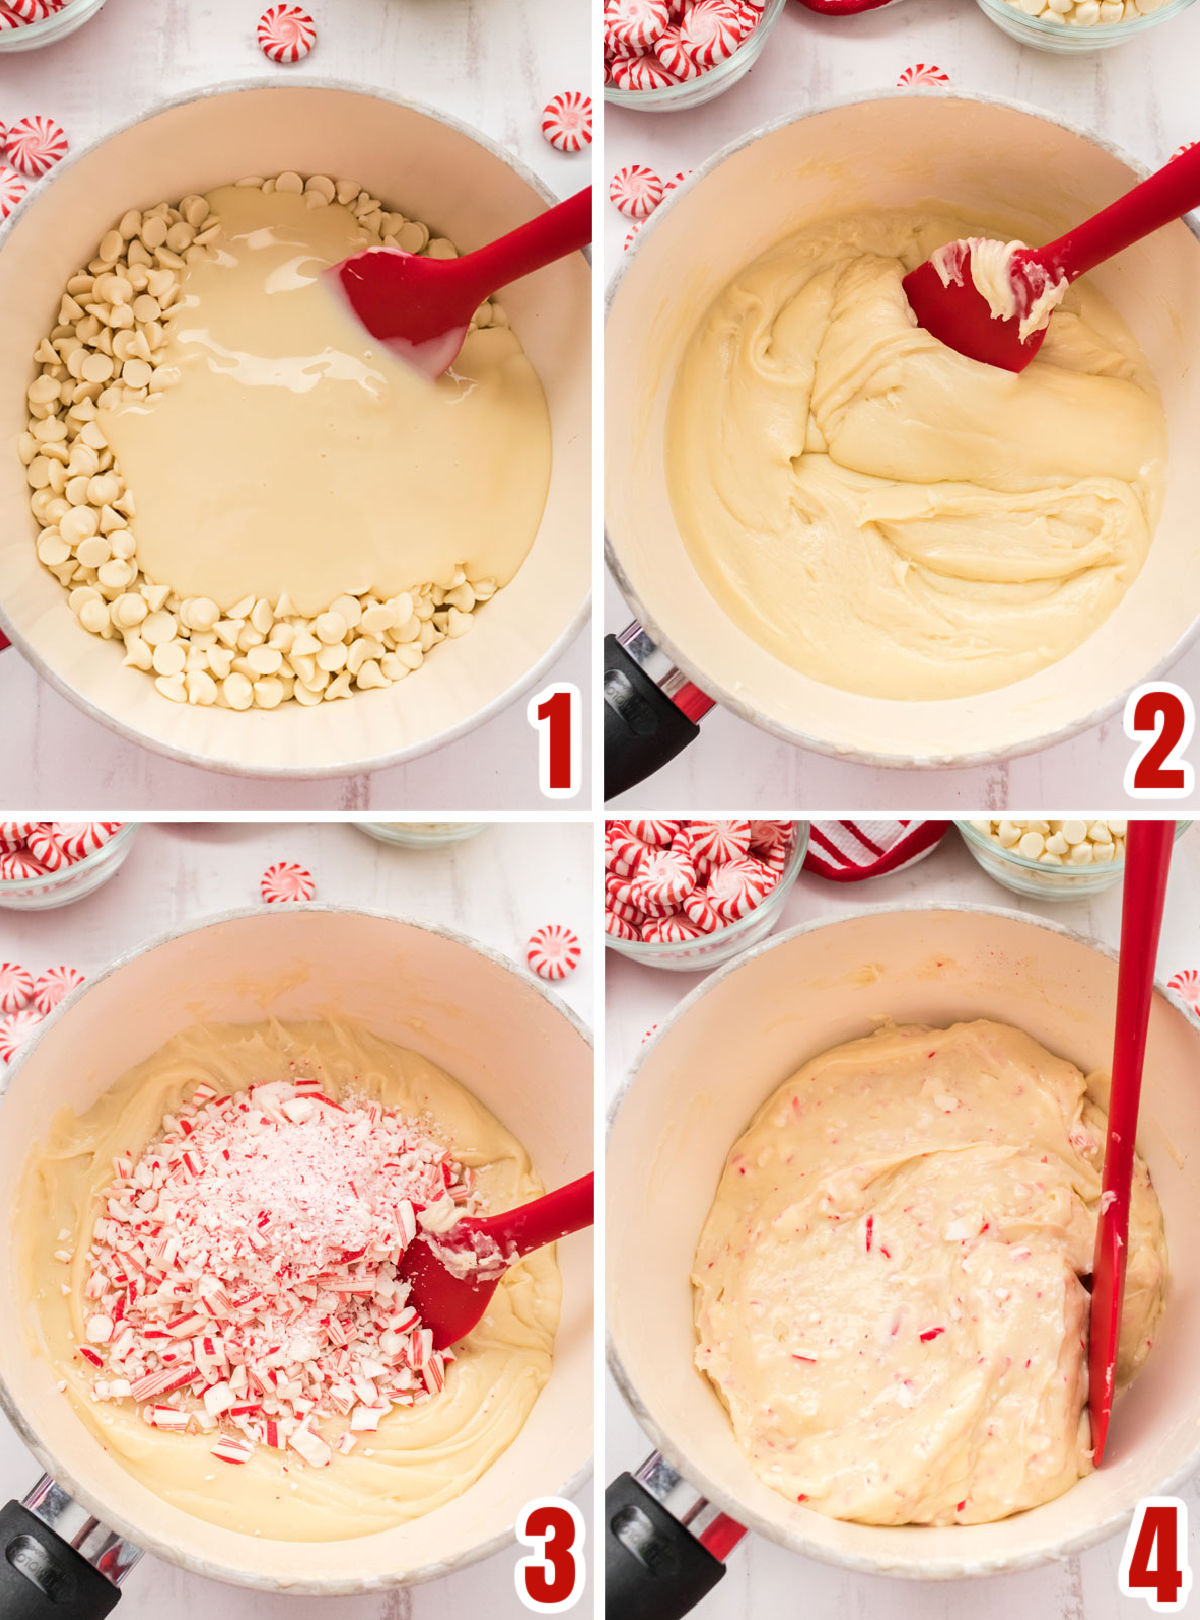 Collage image showing the steps for making Peppermint Fudge.